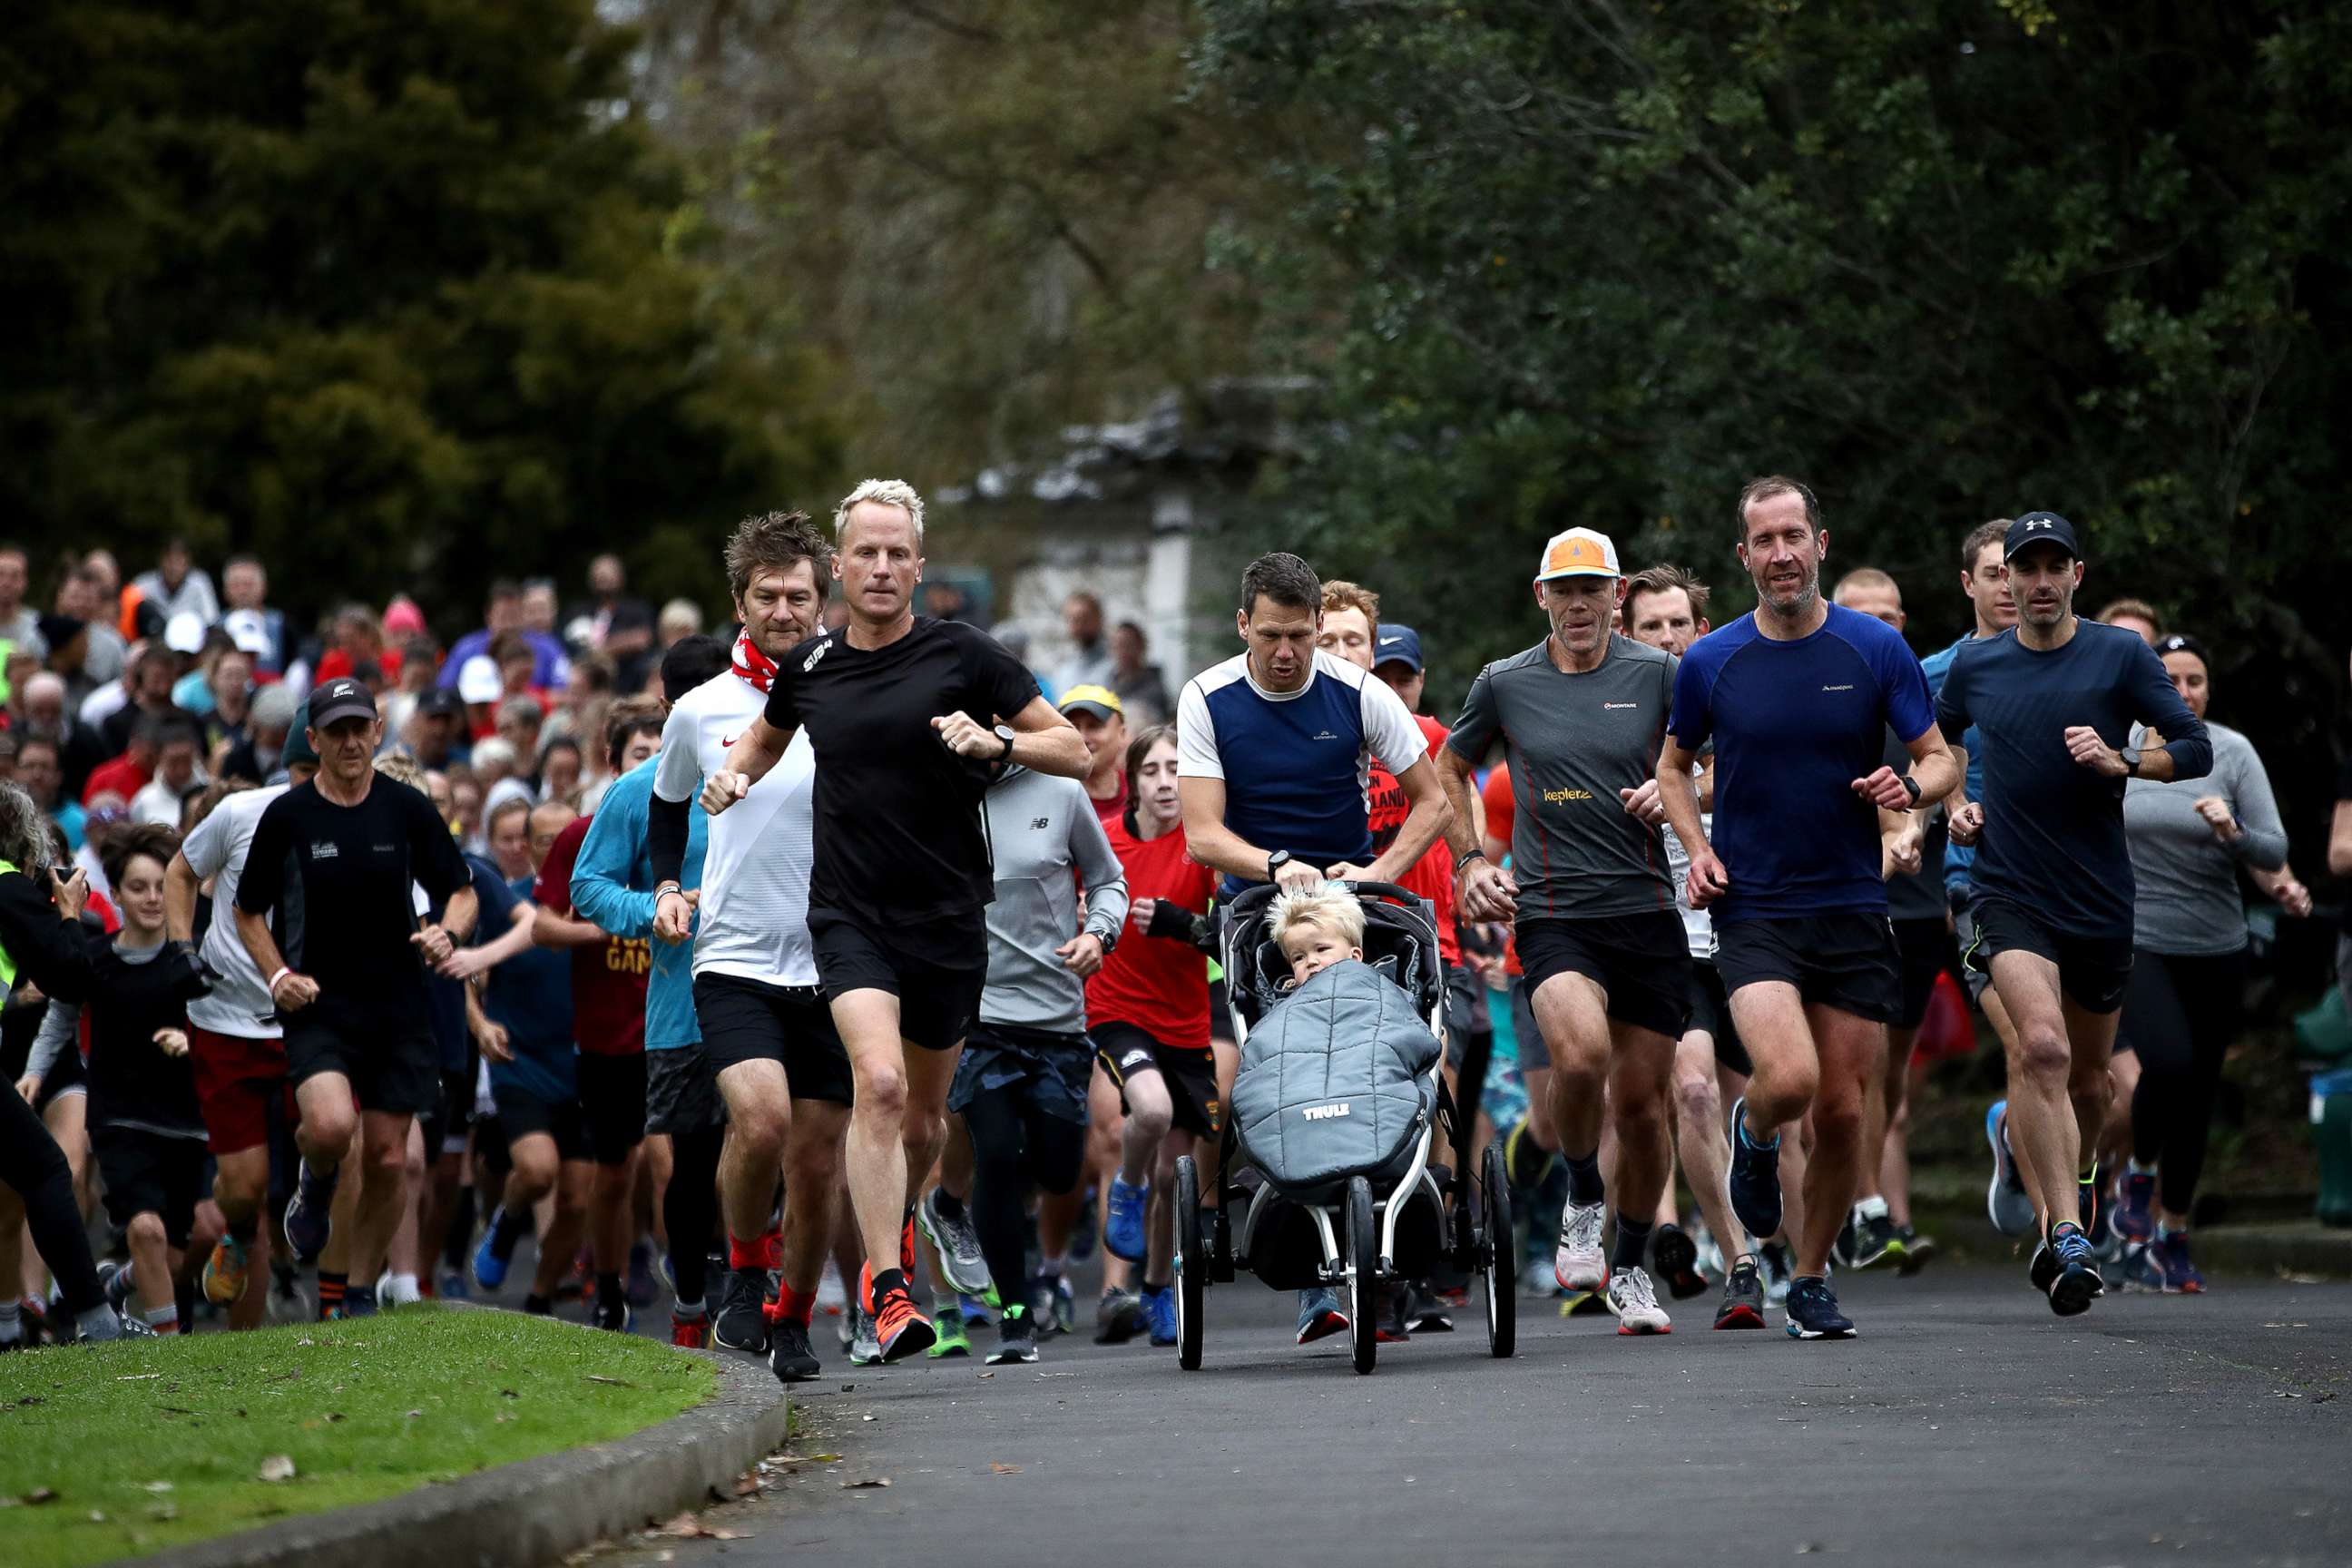 PHOTO: People begin the 5km Parkrun around Western Springs Park on July 4, 2020 in Auckland, New Zealand. Parkrun events across New Zealand have resumed following their temporary suspension due to COVID-19.